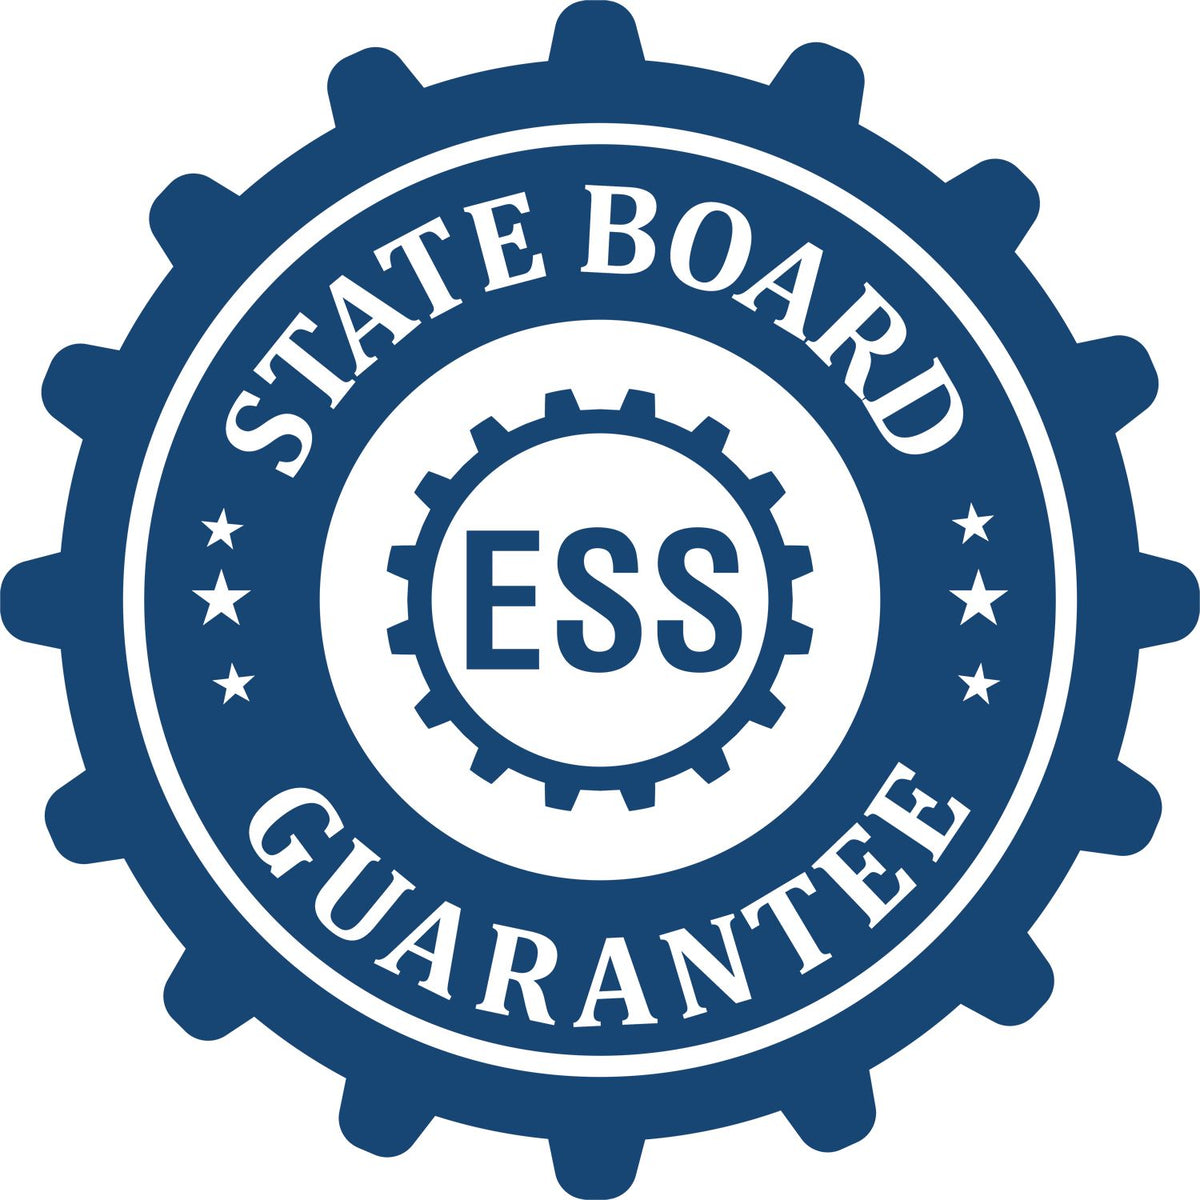 An emblem in a gear shape illustrating a state board guarantee for the Digital Montana Landscape Architect Stamp product.